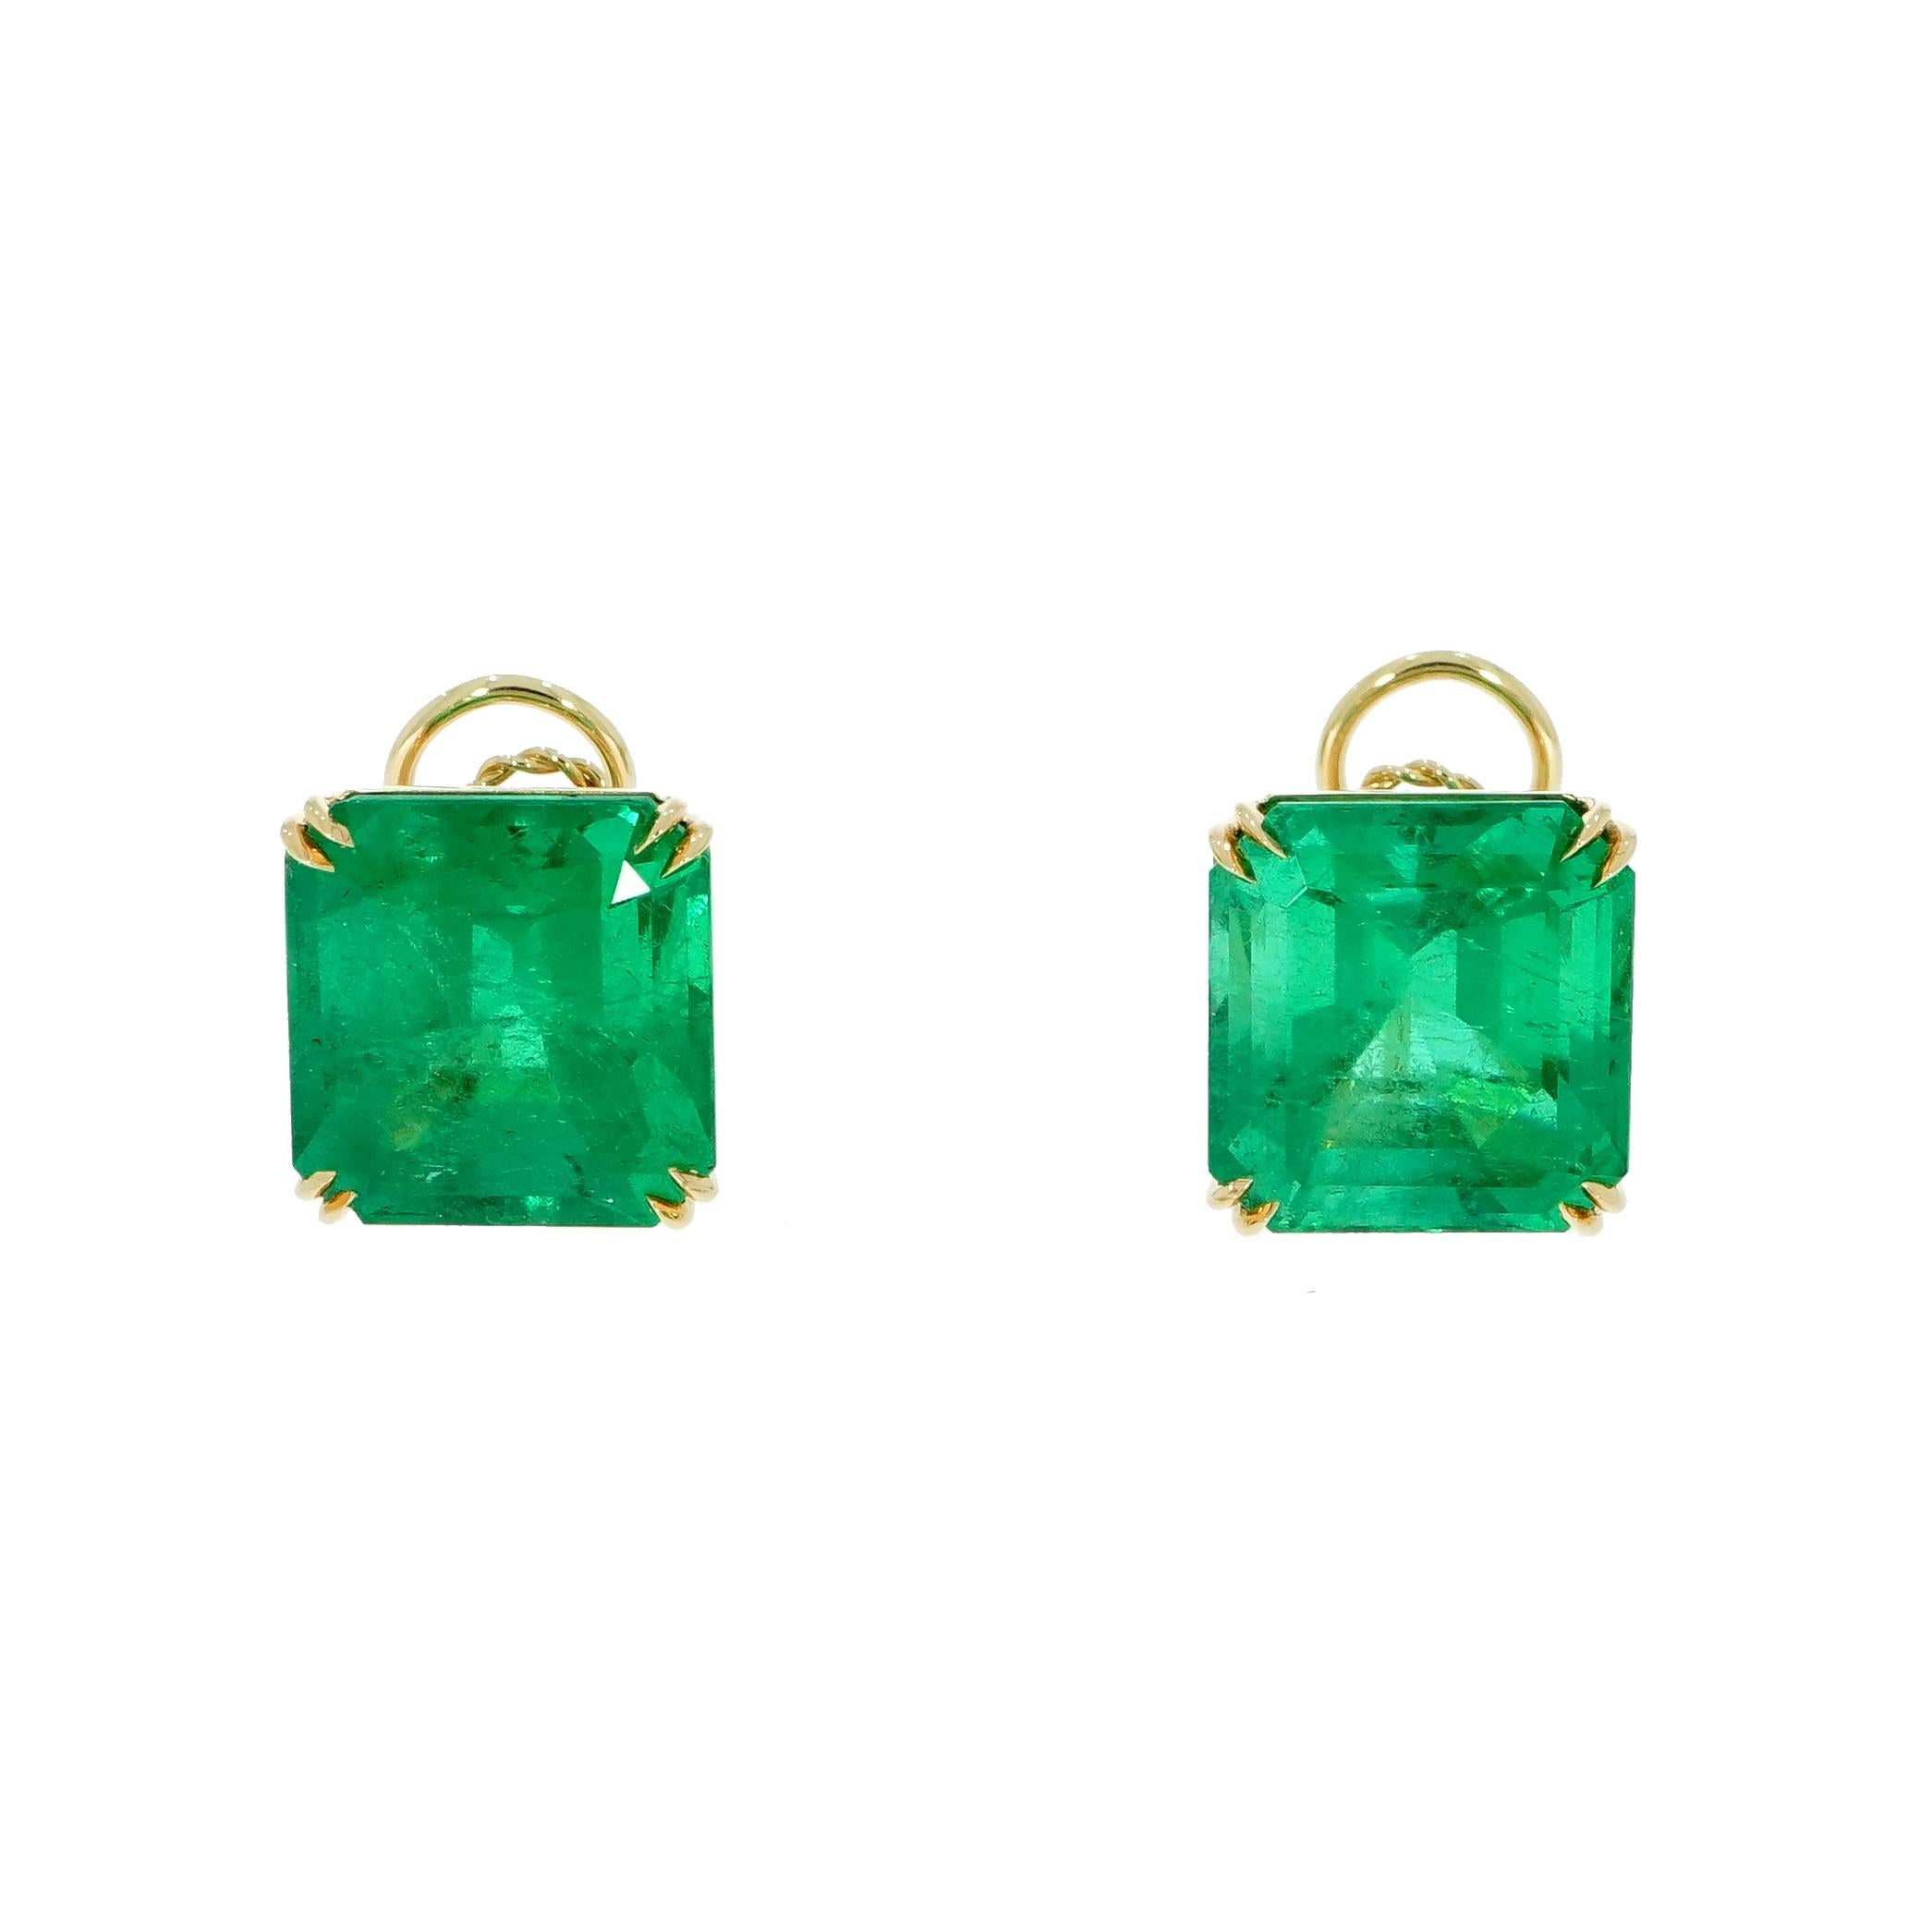 Elegant Stud Earrings Natural Medium Green Colombian Emerald Squared Emerald Cut Total Weight 44.13 carats. 
The earrings are crafted in 18 karat yellow gold and are secured with nice size omega clip style backs for comfort. 
The Emeralds weigh